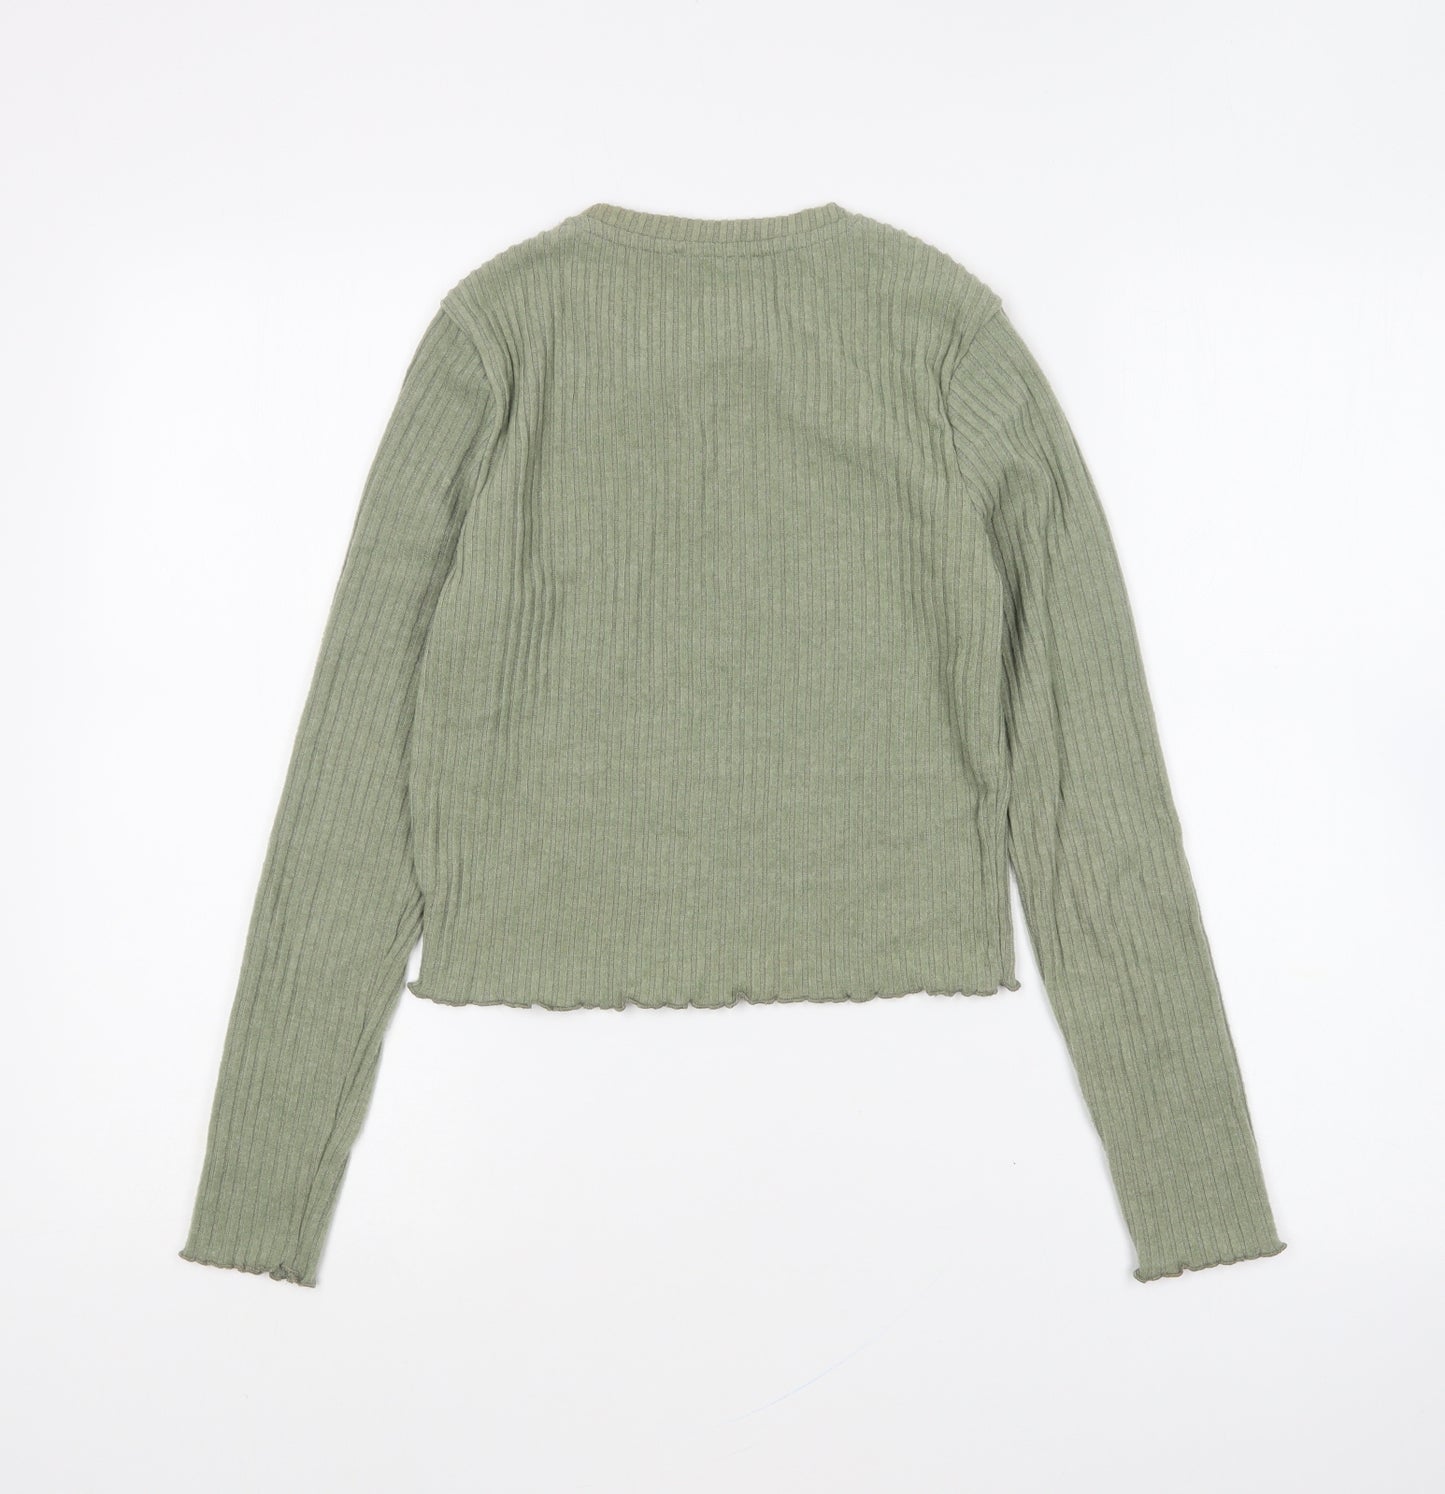 New Look Girls Green Round Neck Cotton Pullover Jumper Size 12-13 Years Pullover - Angel